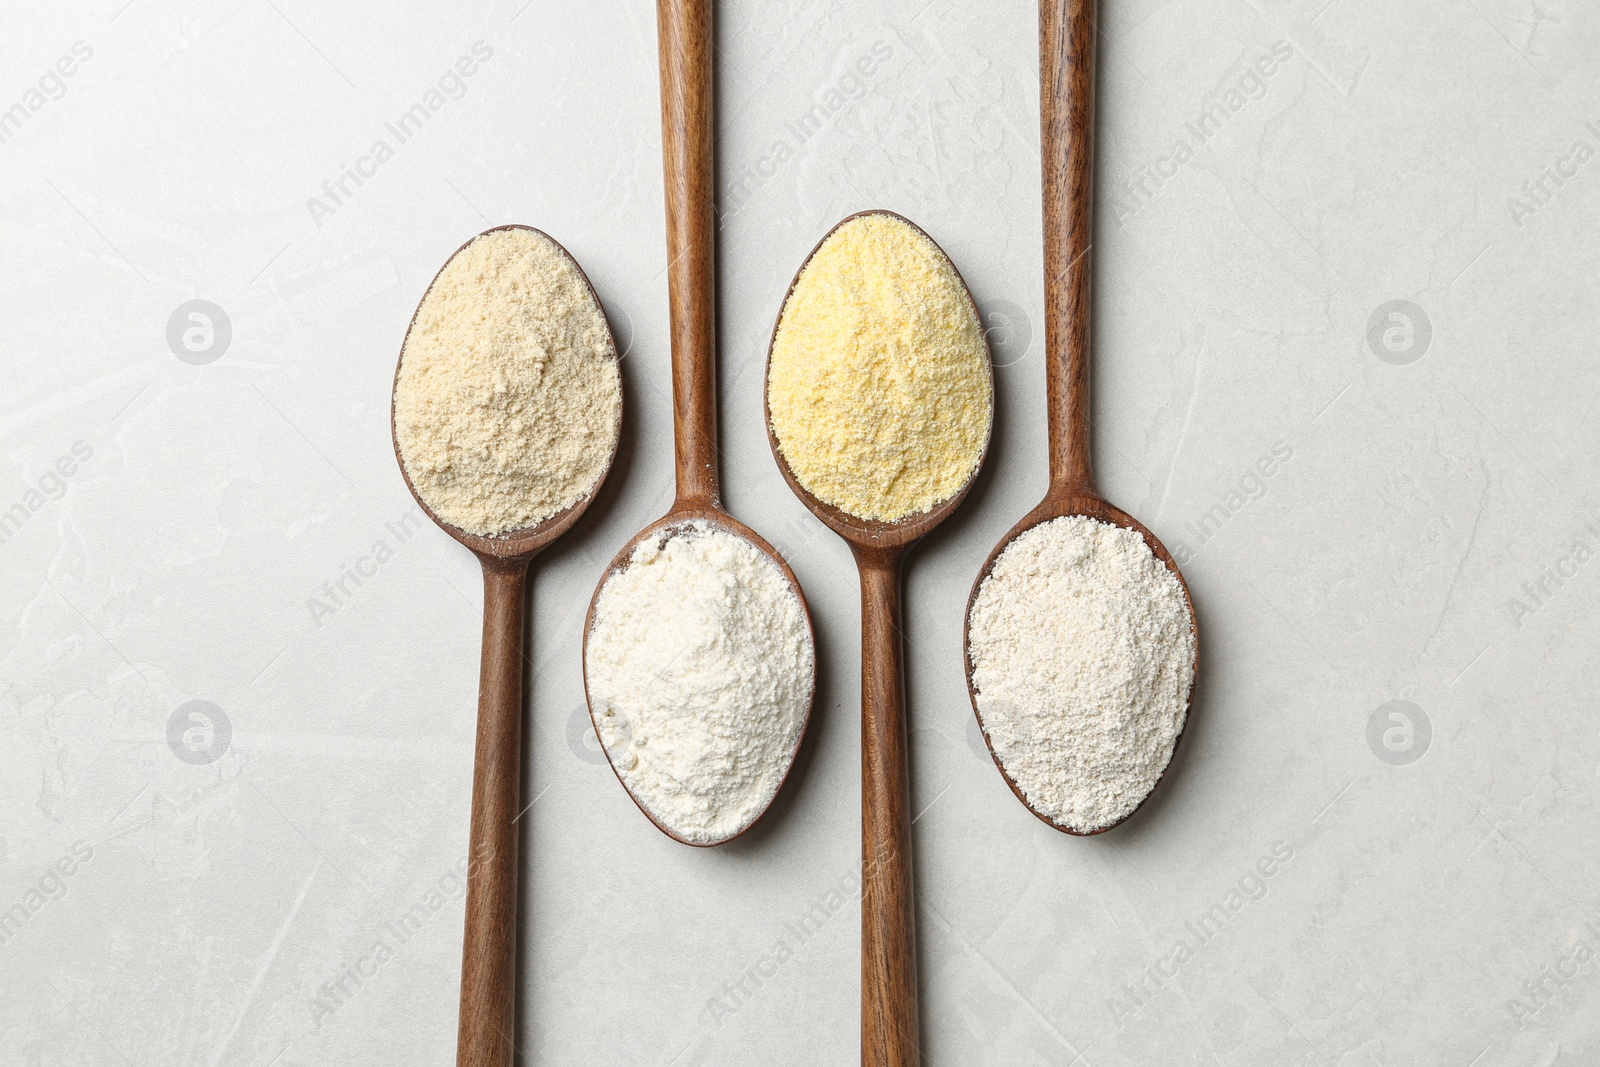 Photo of Spoons with different types of flour on table, top view